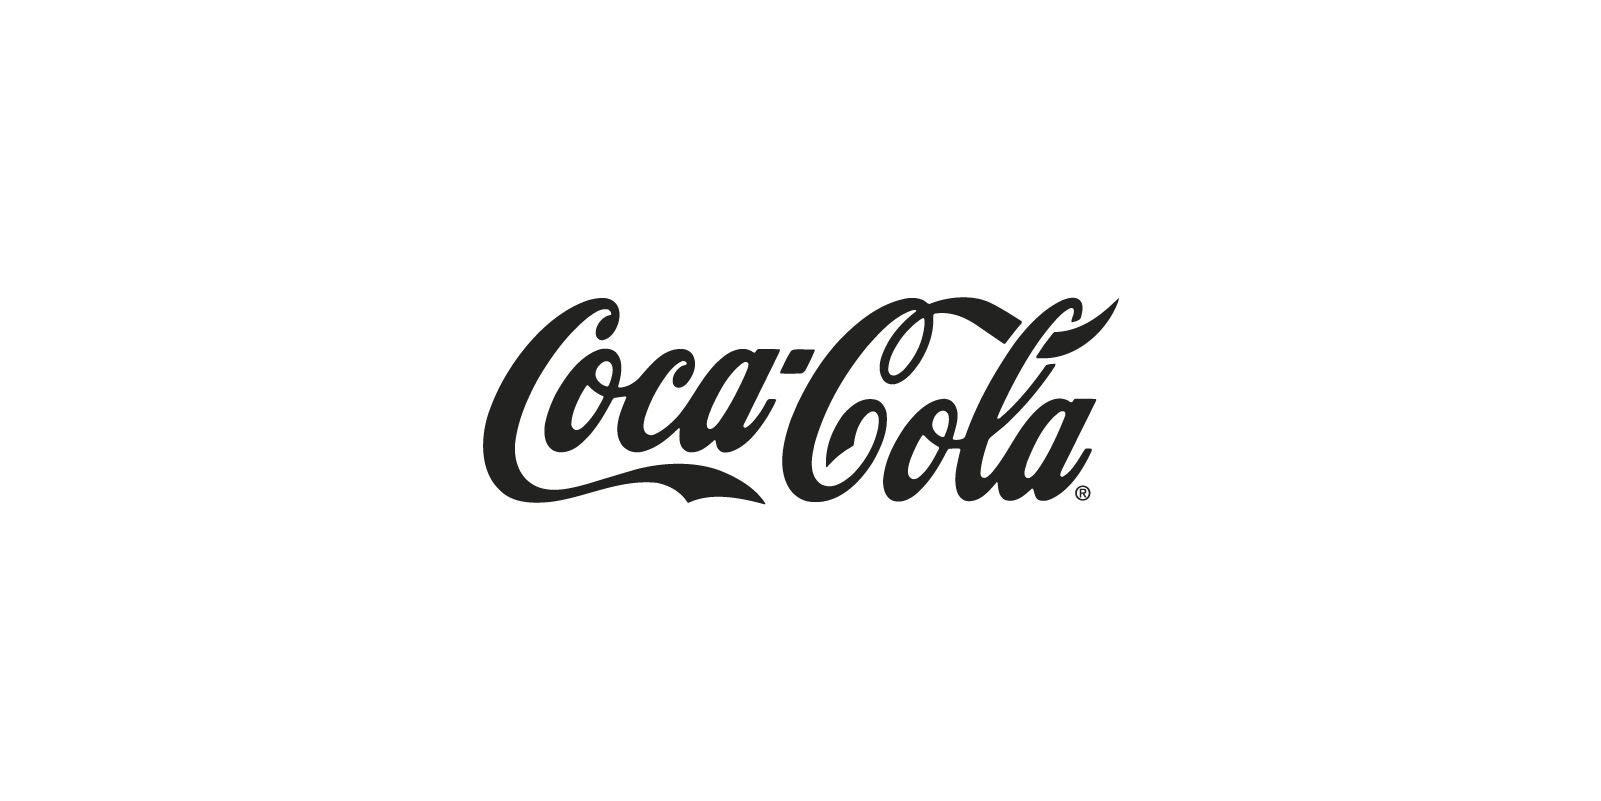 CocaCola@4x.png